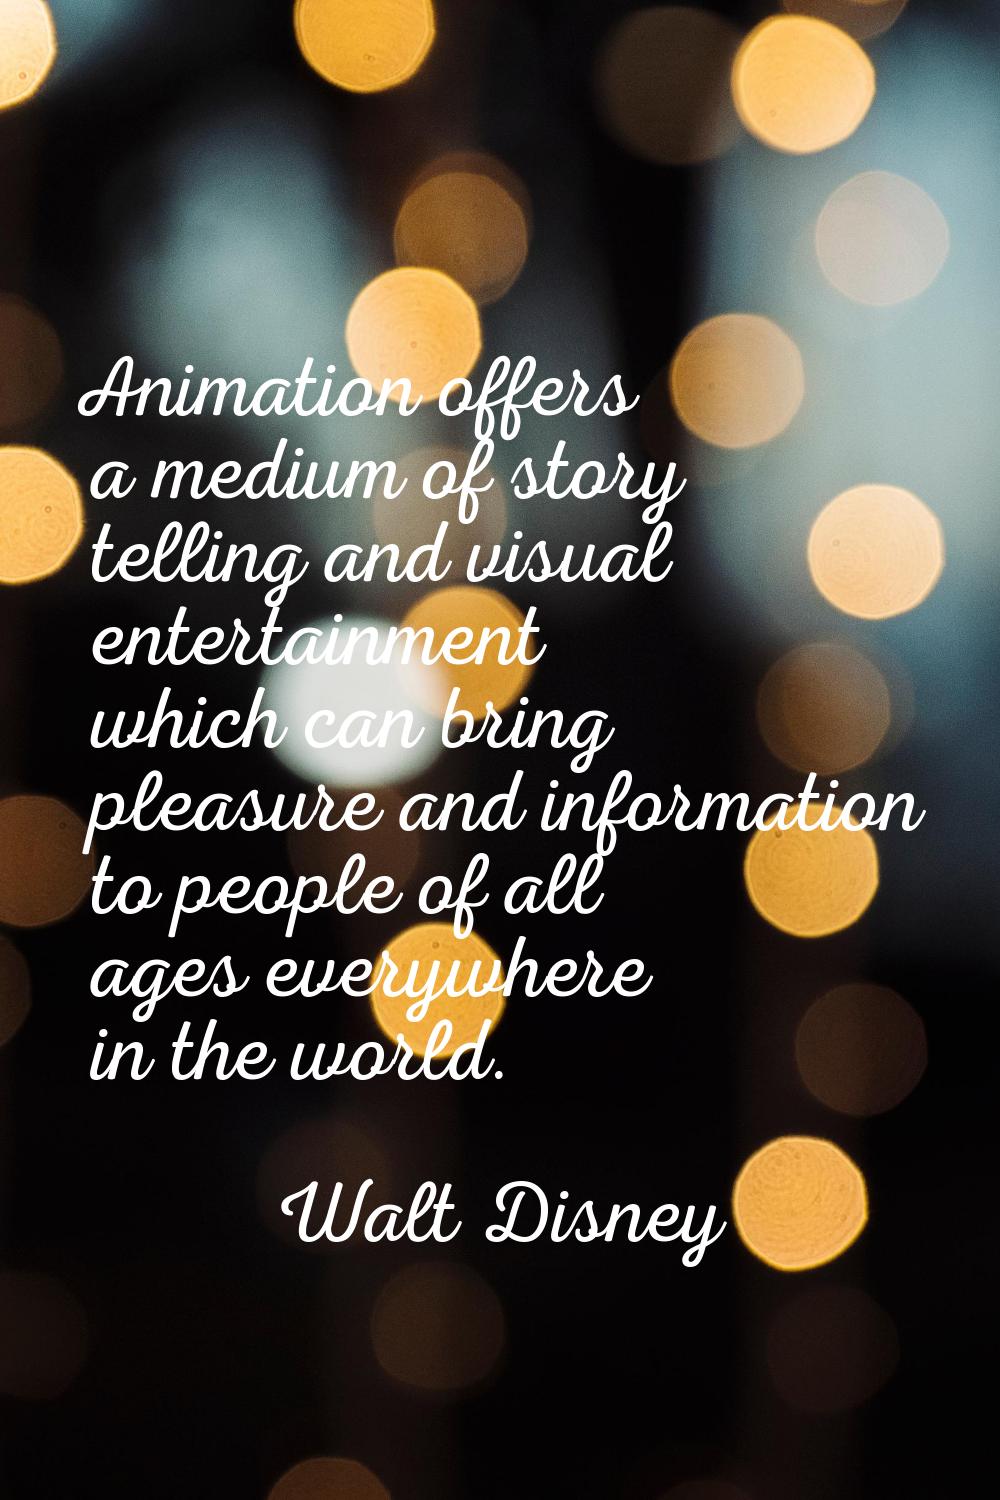 Animation offers a medium of story telling and visual entertainment which can bring pleasure and in